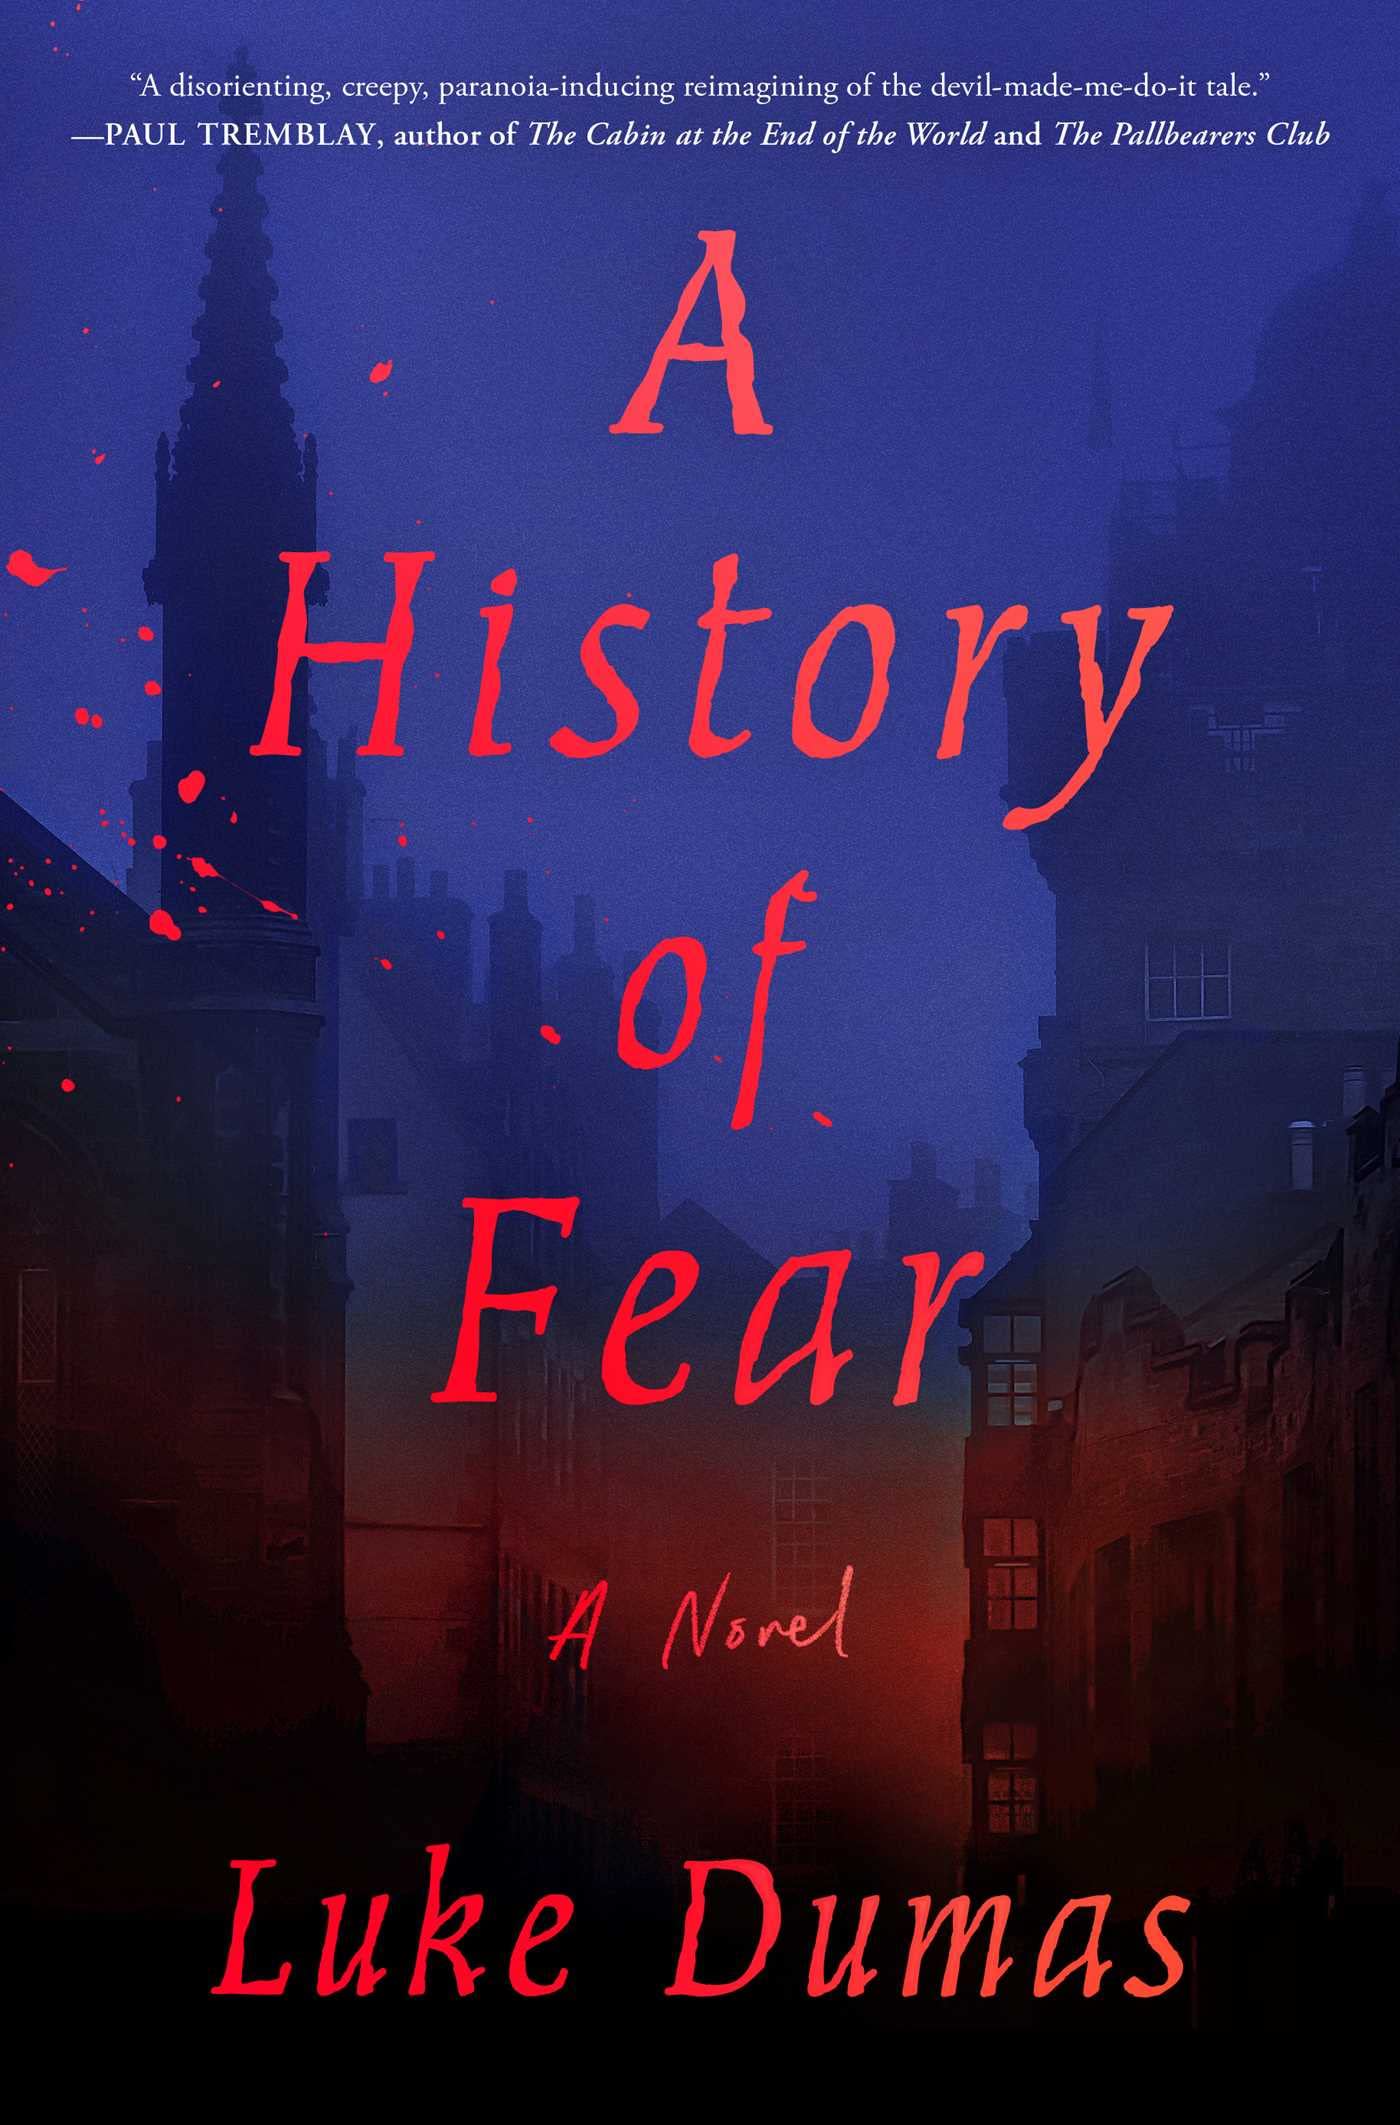 Image for "A History of Fear"